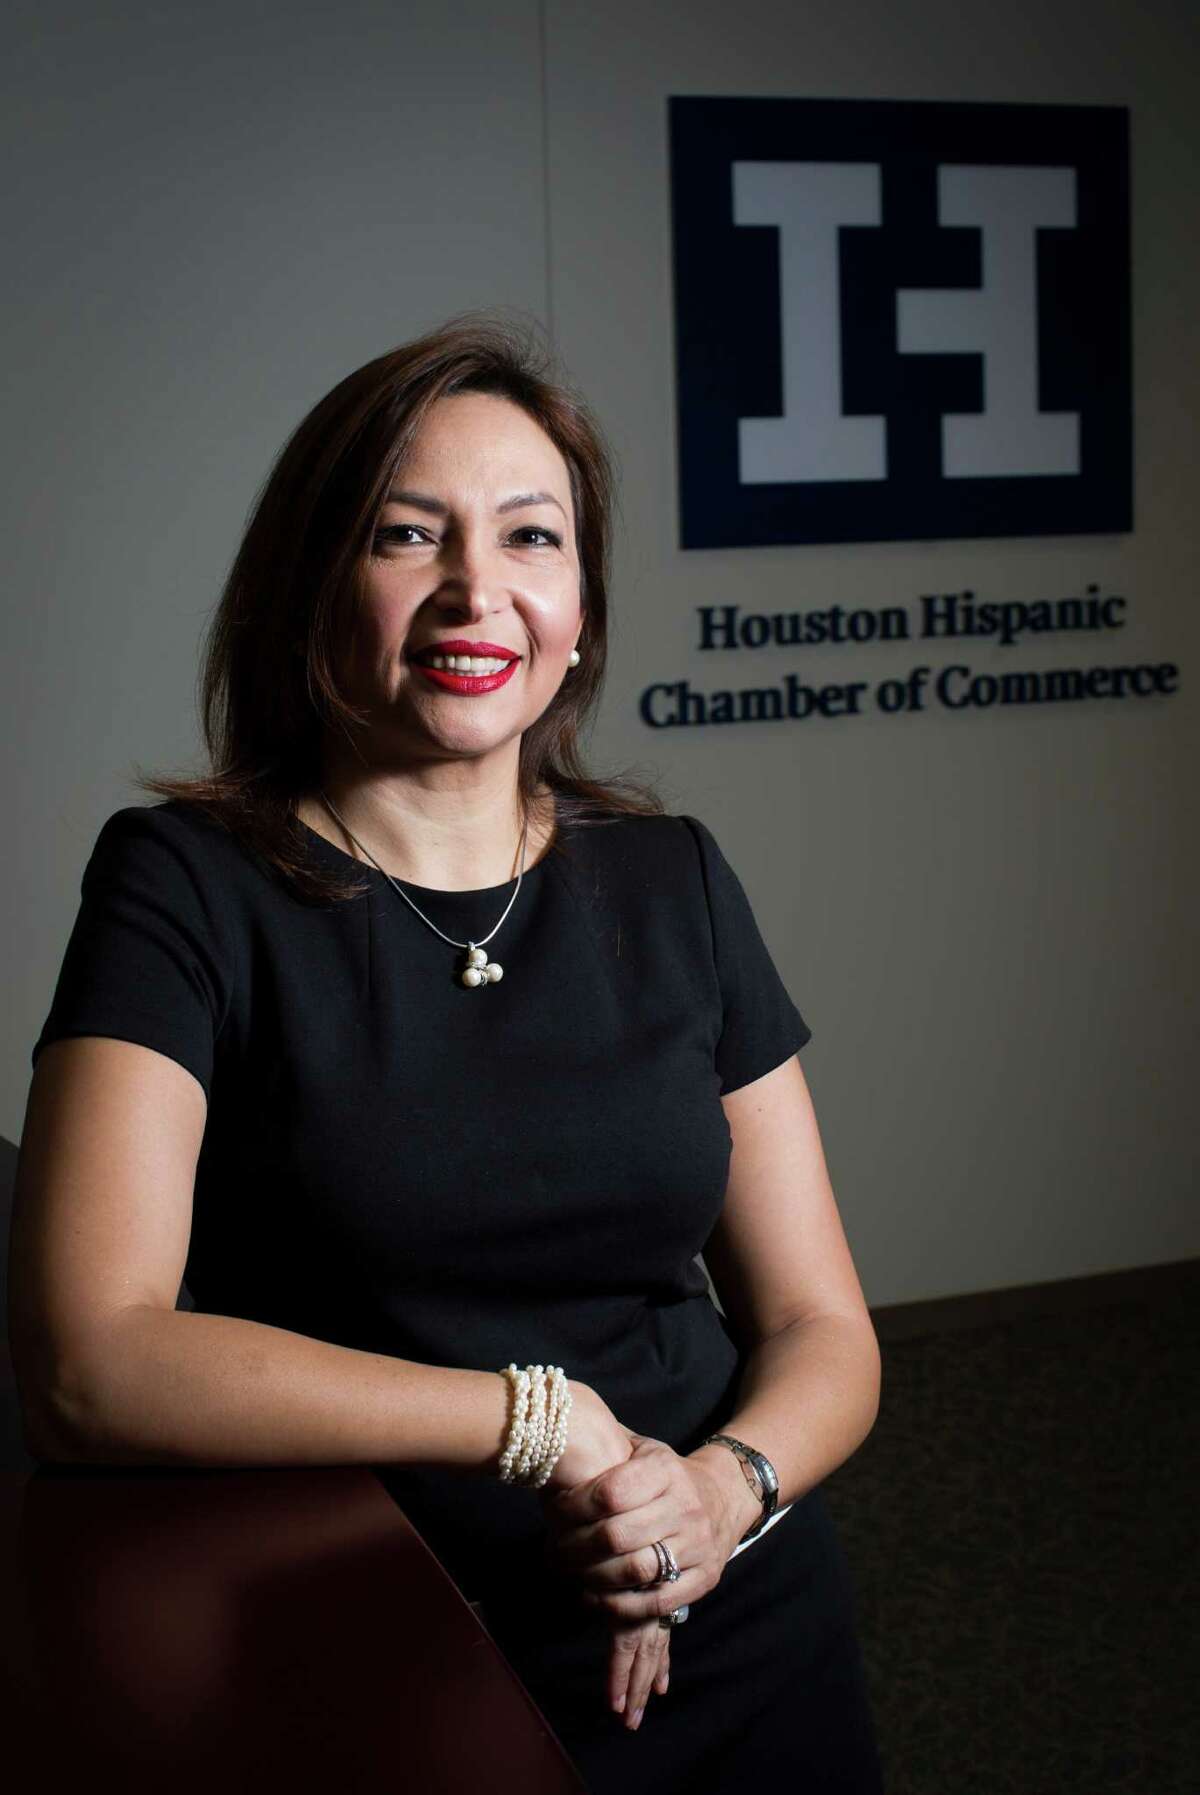 Diva Herazo, is a board member for the Houston Hispanic Chamber of Commerce and a Colombian immigrant who started a mobile dentist business called Biomedent. The company provides mobile dental services in Houston. Thursday, Aug. 25, 2016, in Houston. ( Marie D. De Jesus / Houston Chronicle )